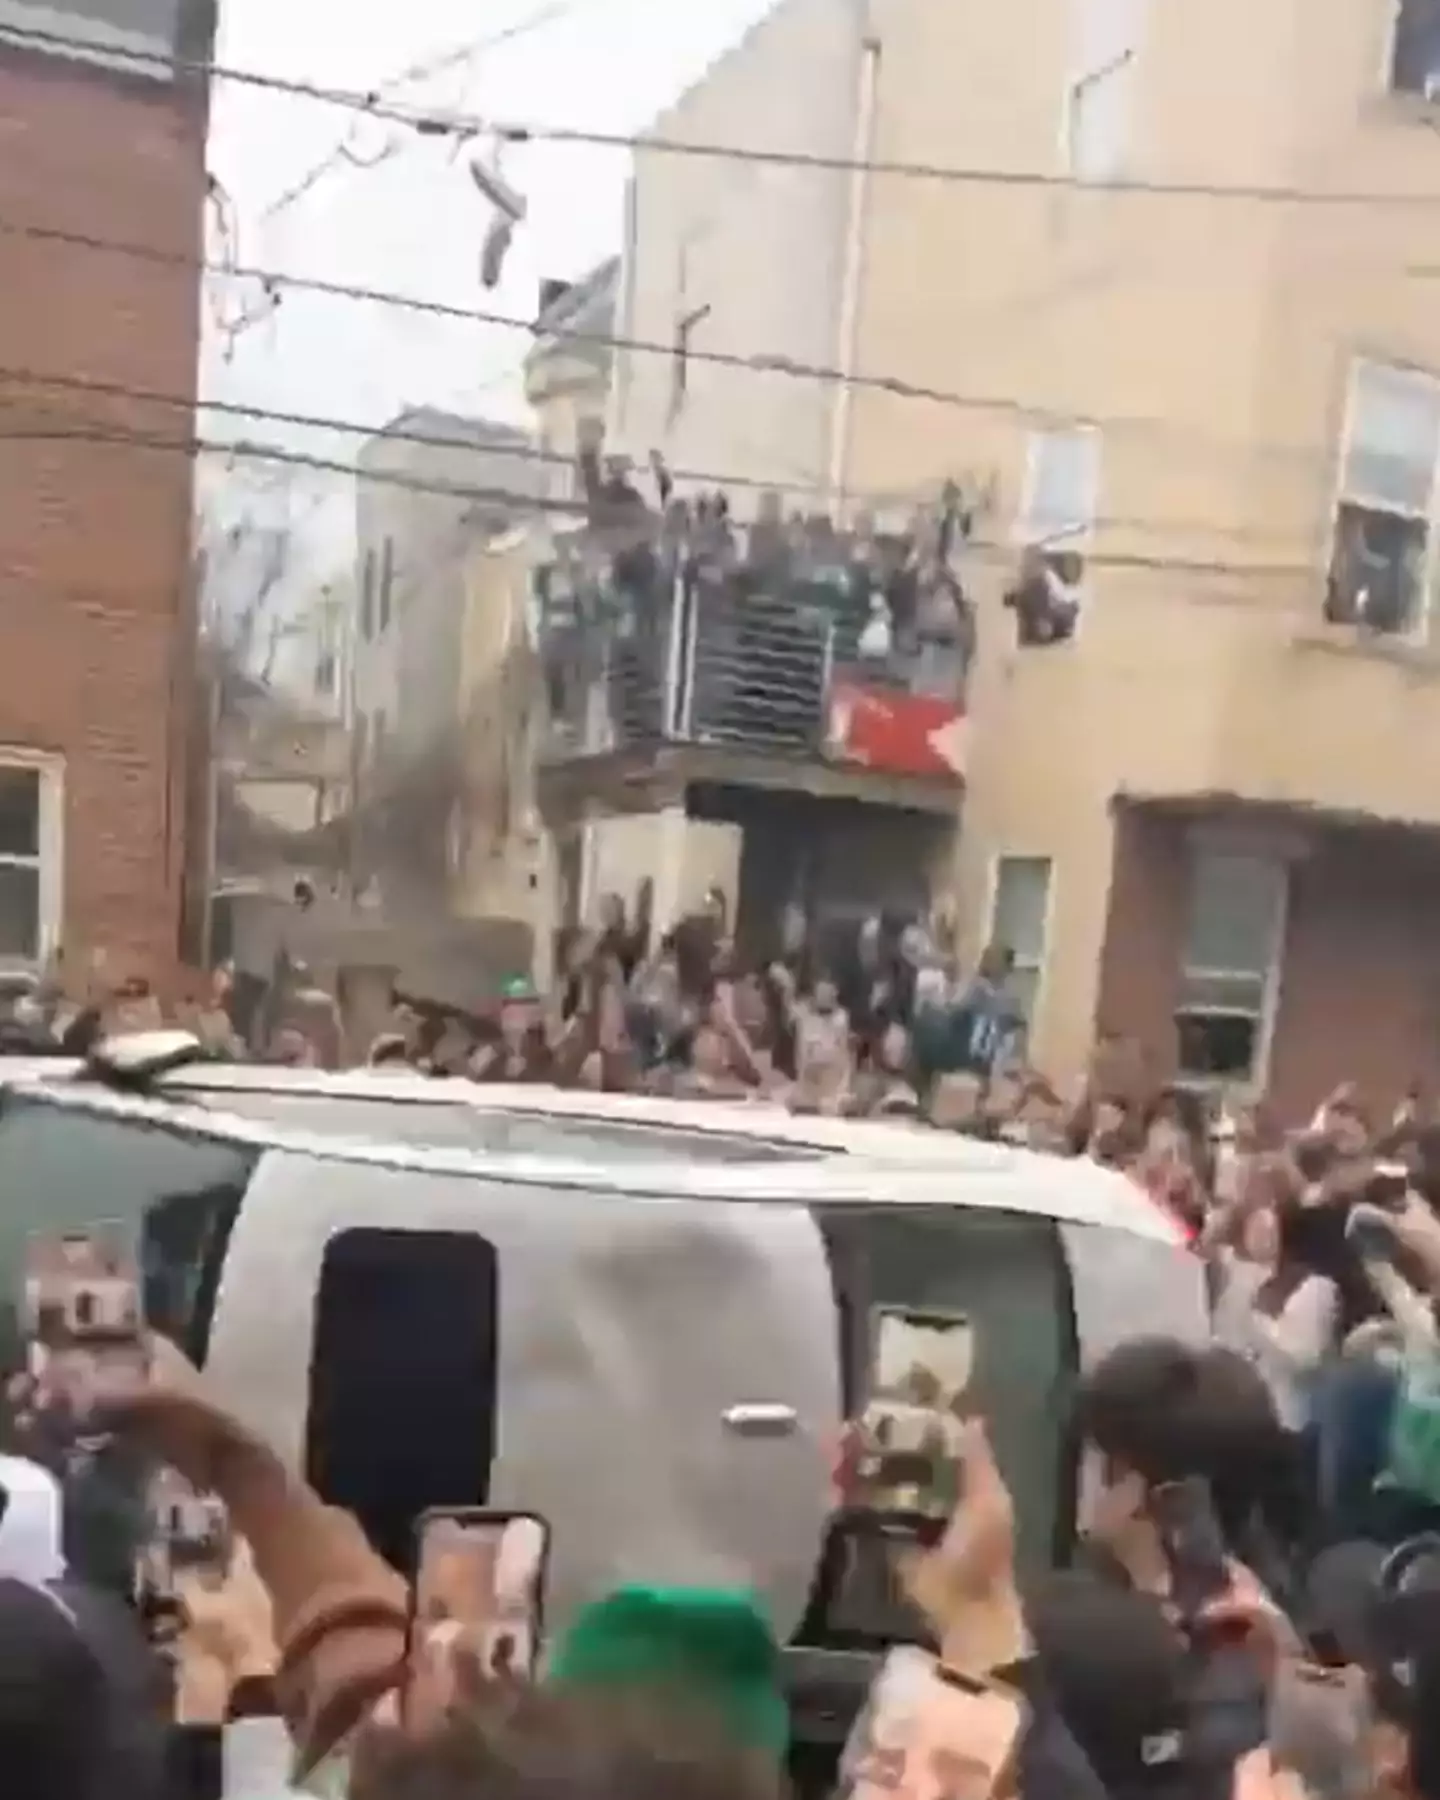 Fans ended up flipping a parked car over.